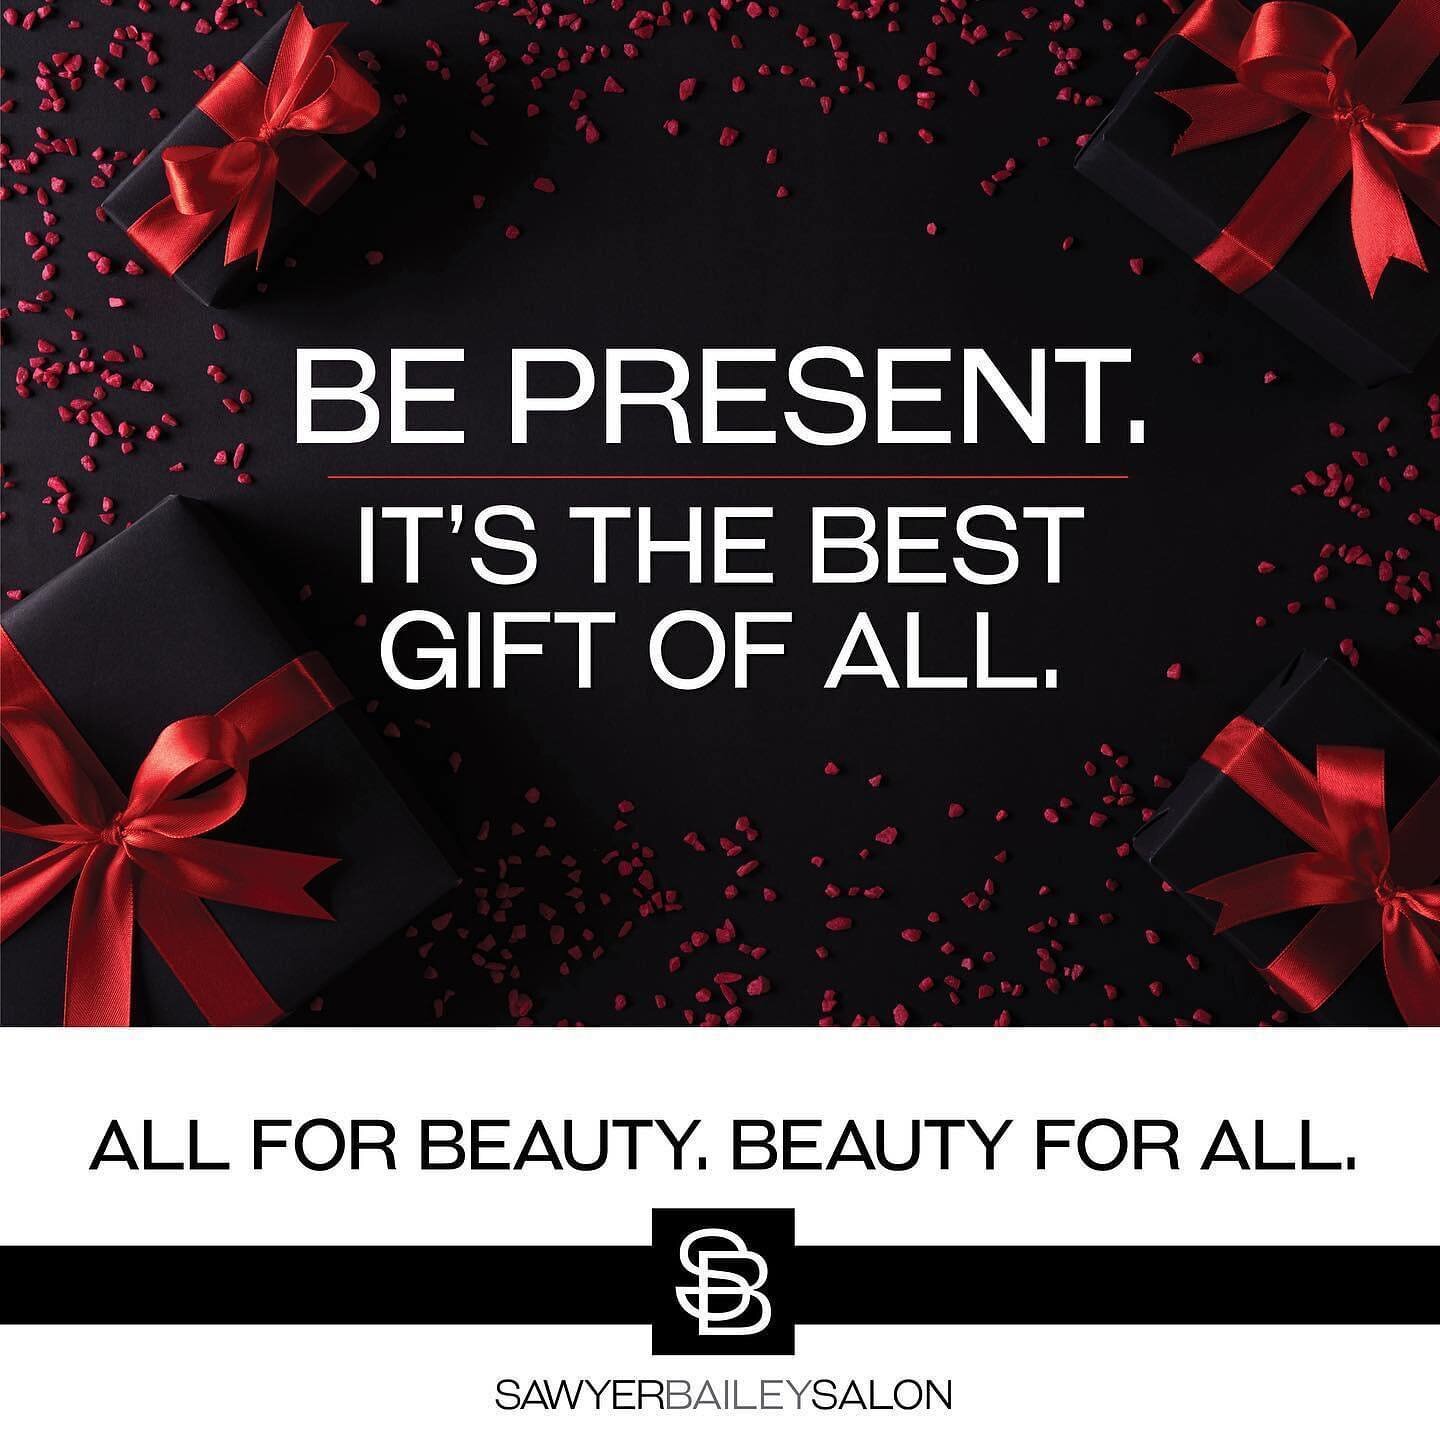 In the midst of it all, we offer this friendly reminder. ❤️ Merry Christmas from our salon family to yours!